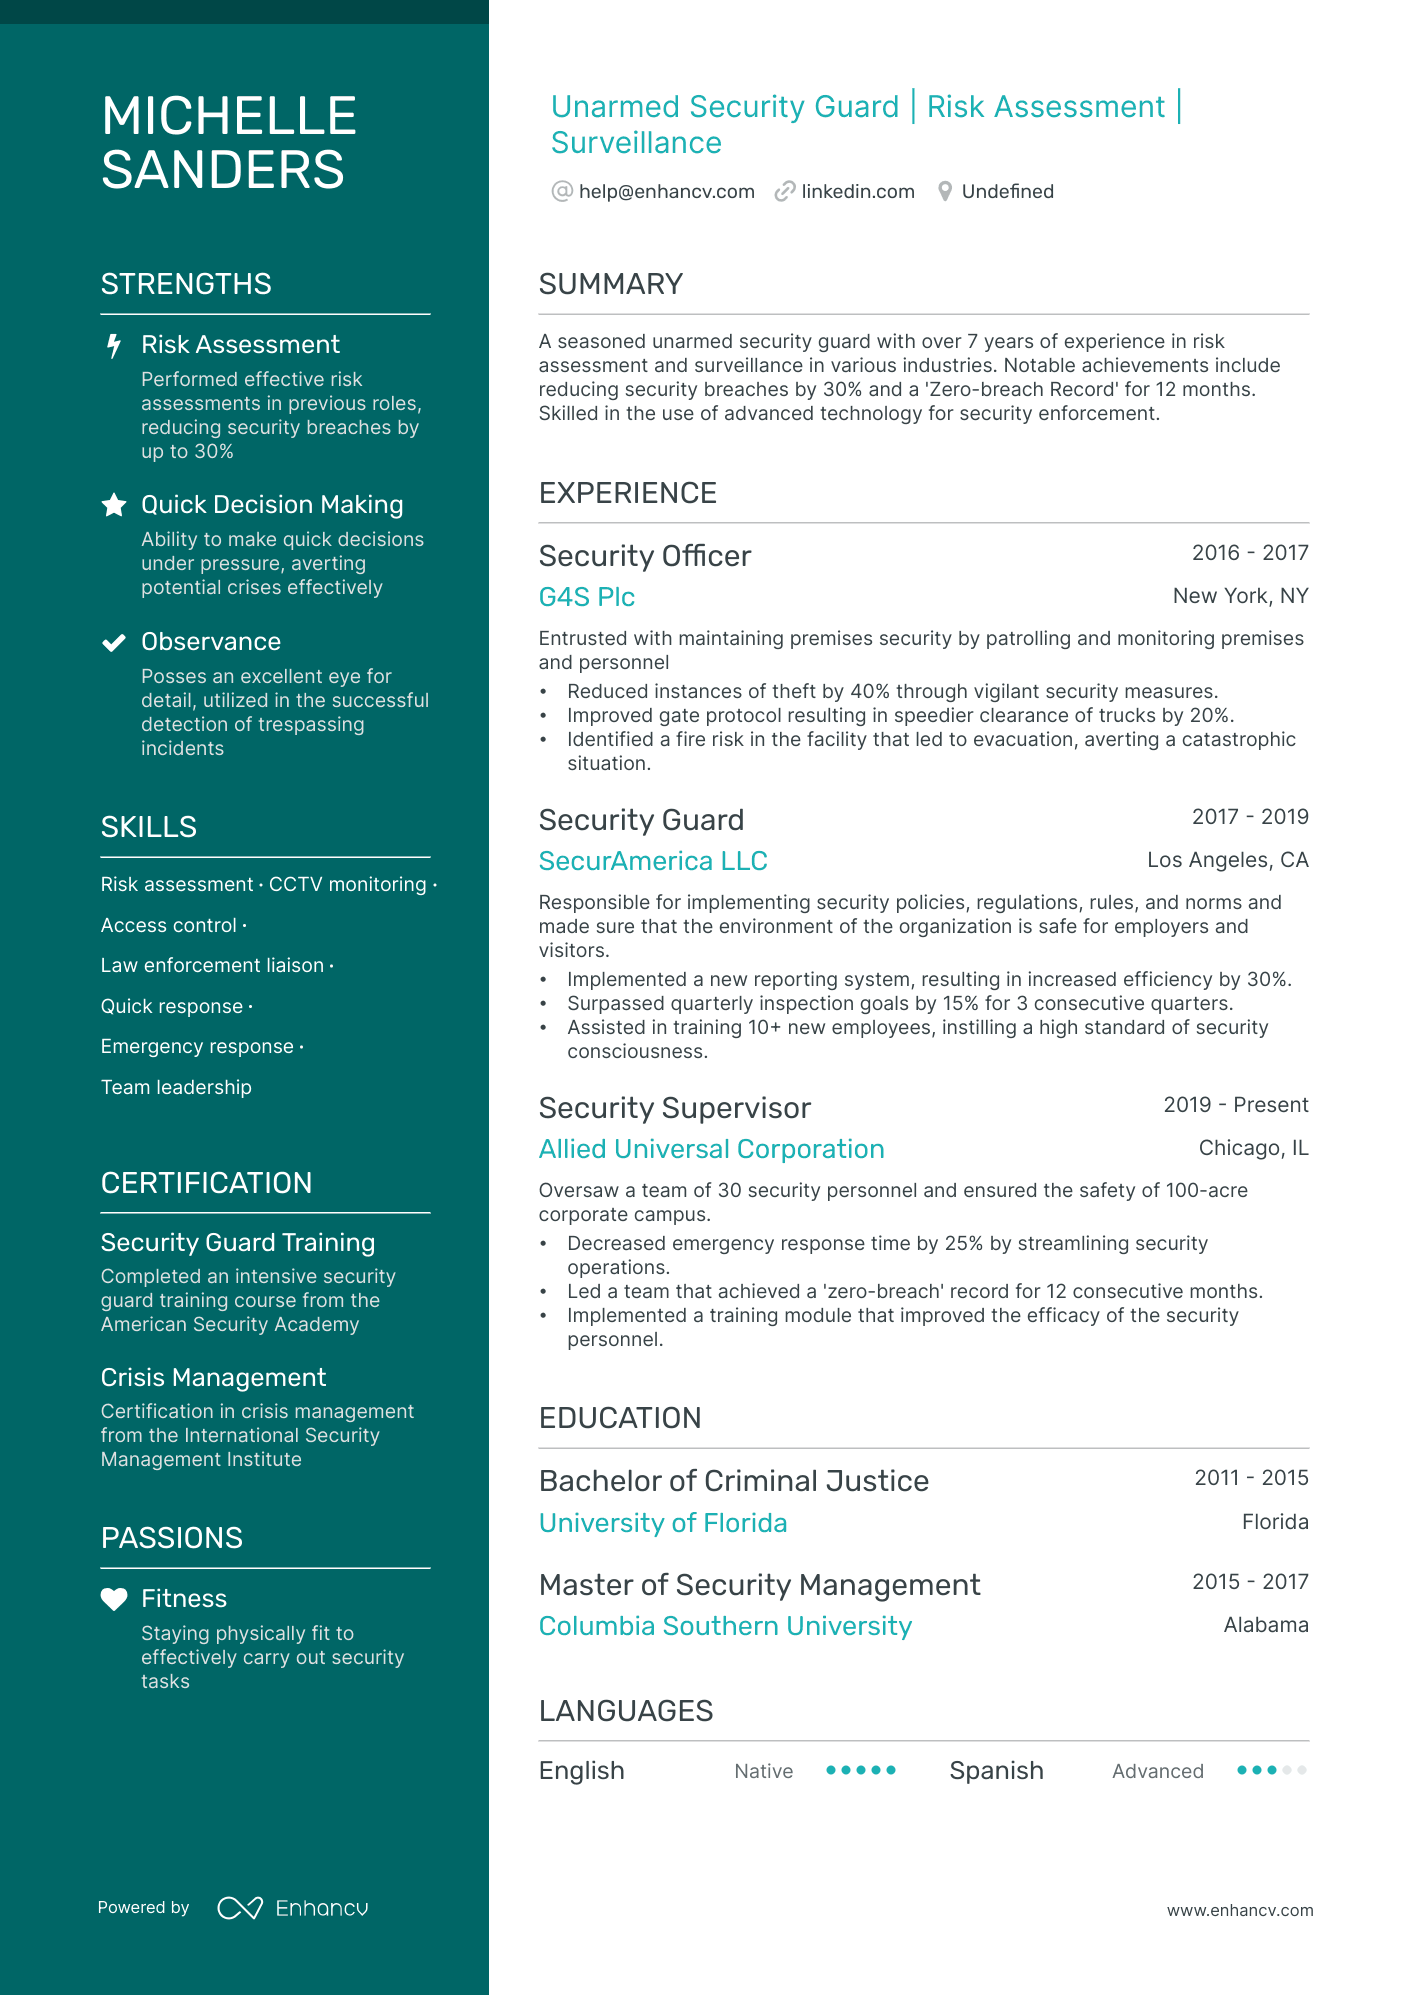 Unarmed Security Guard resume example